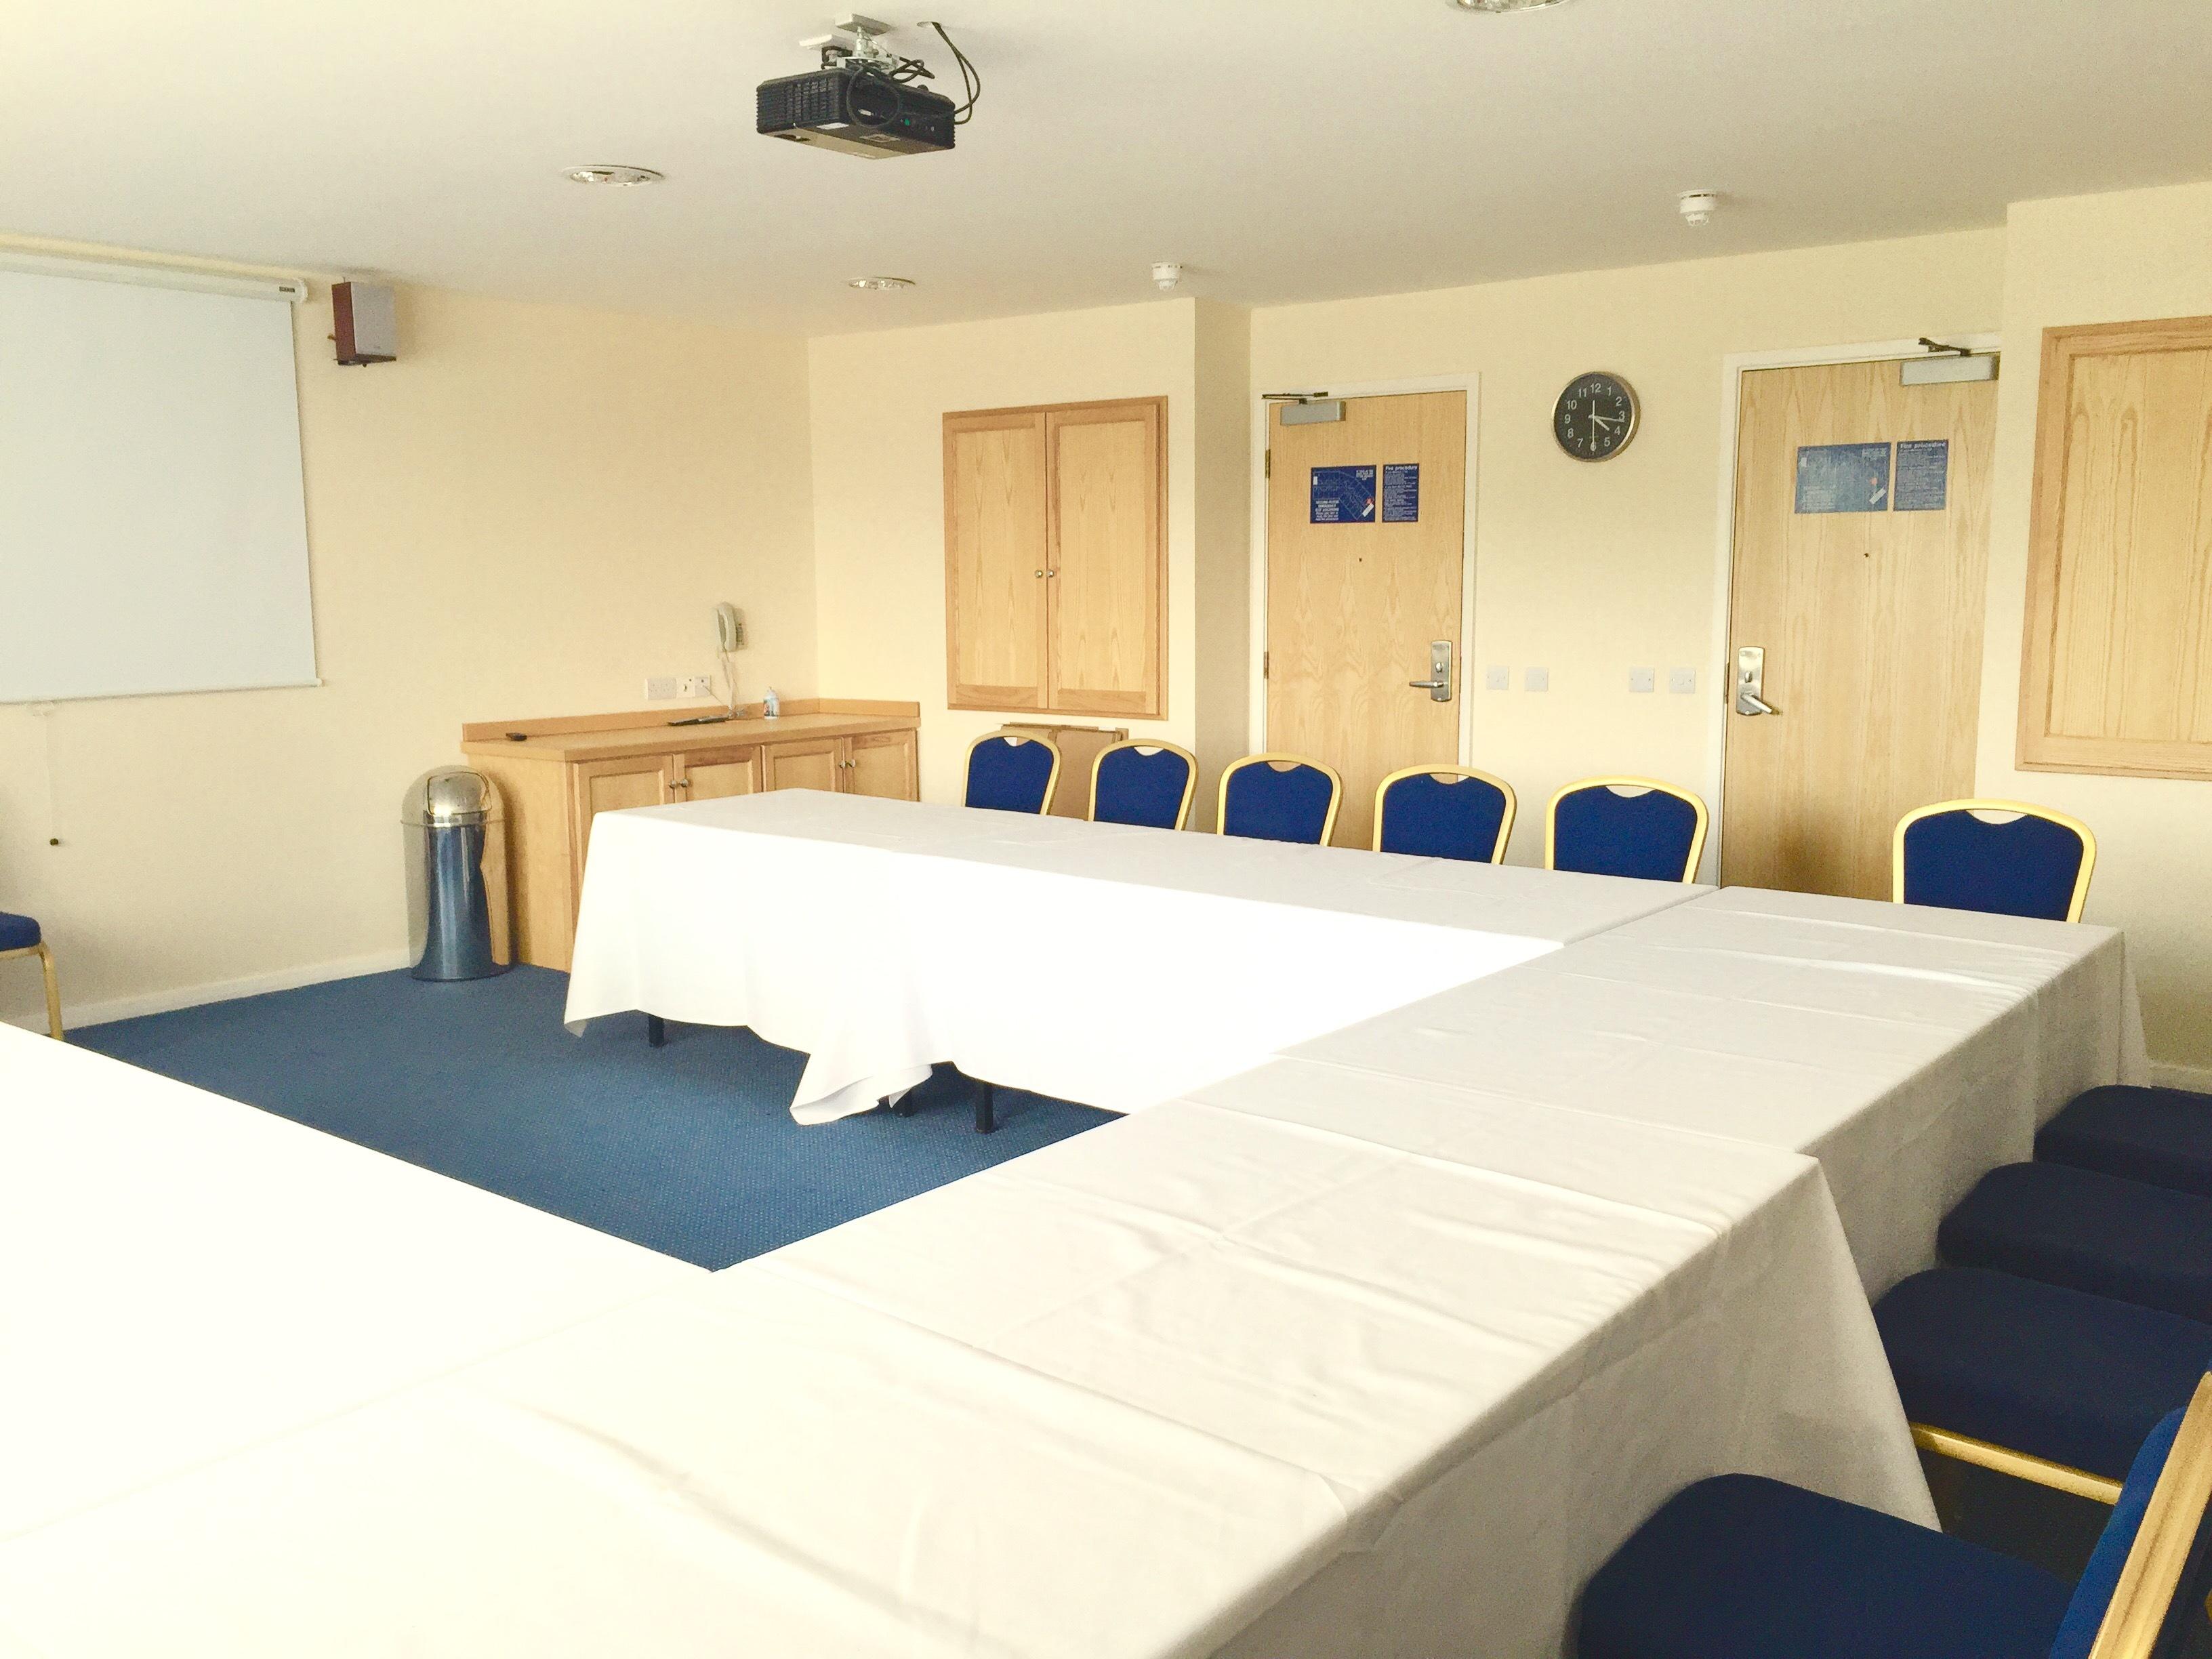 The Fairway Meeting Room, The Fairway And Bluebell Banqueting Suite photo #2